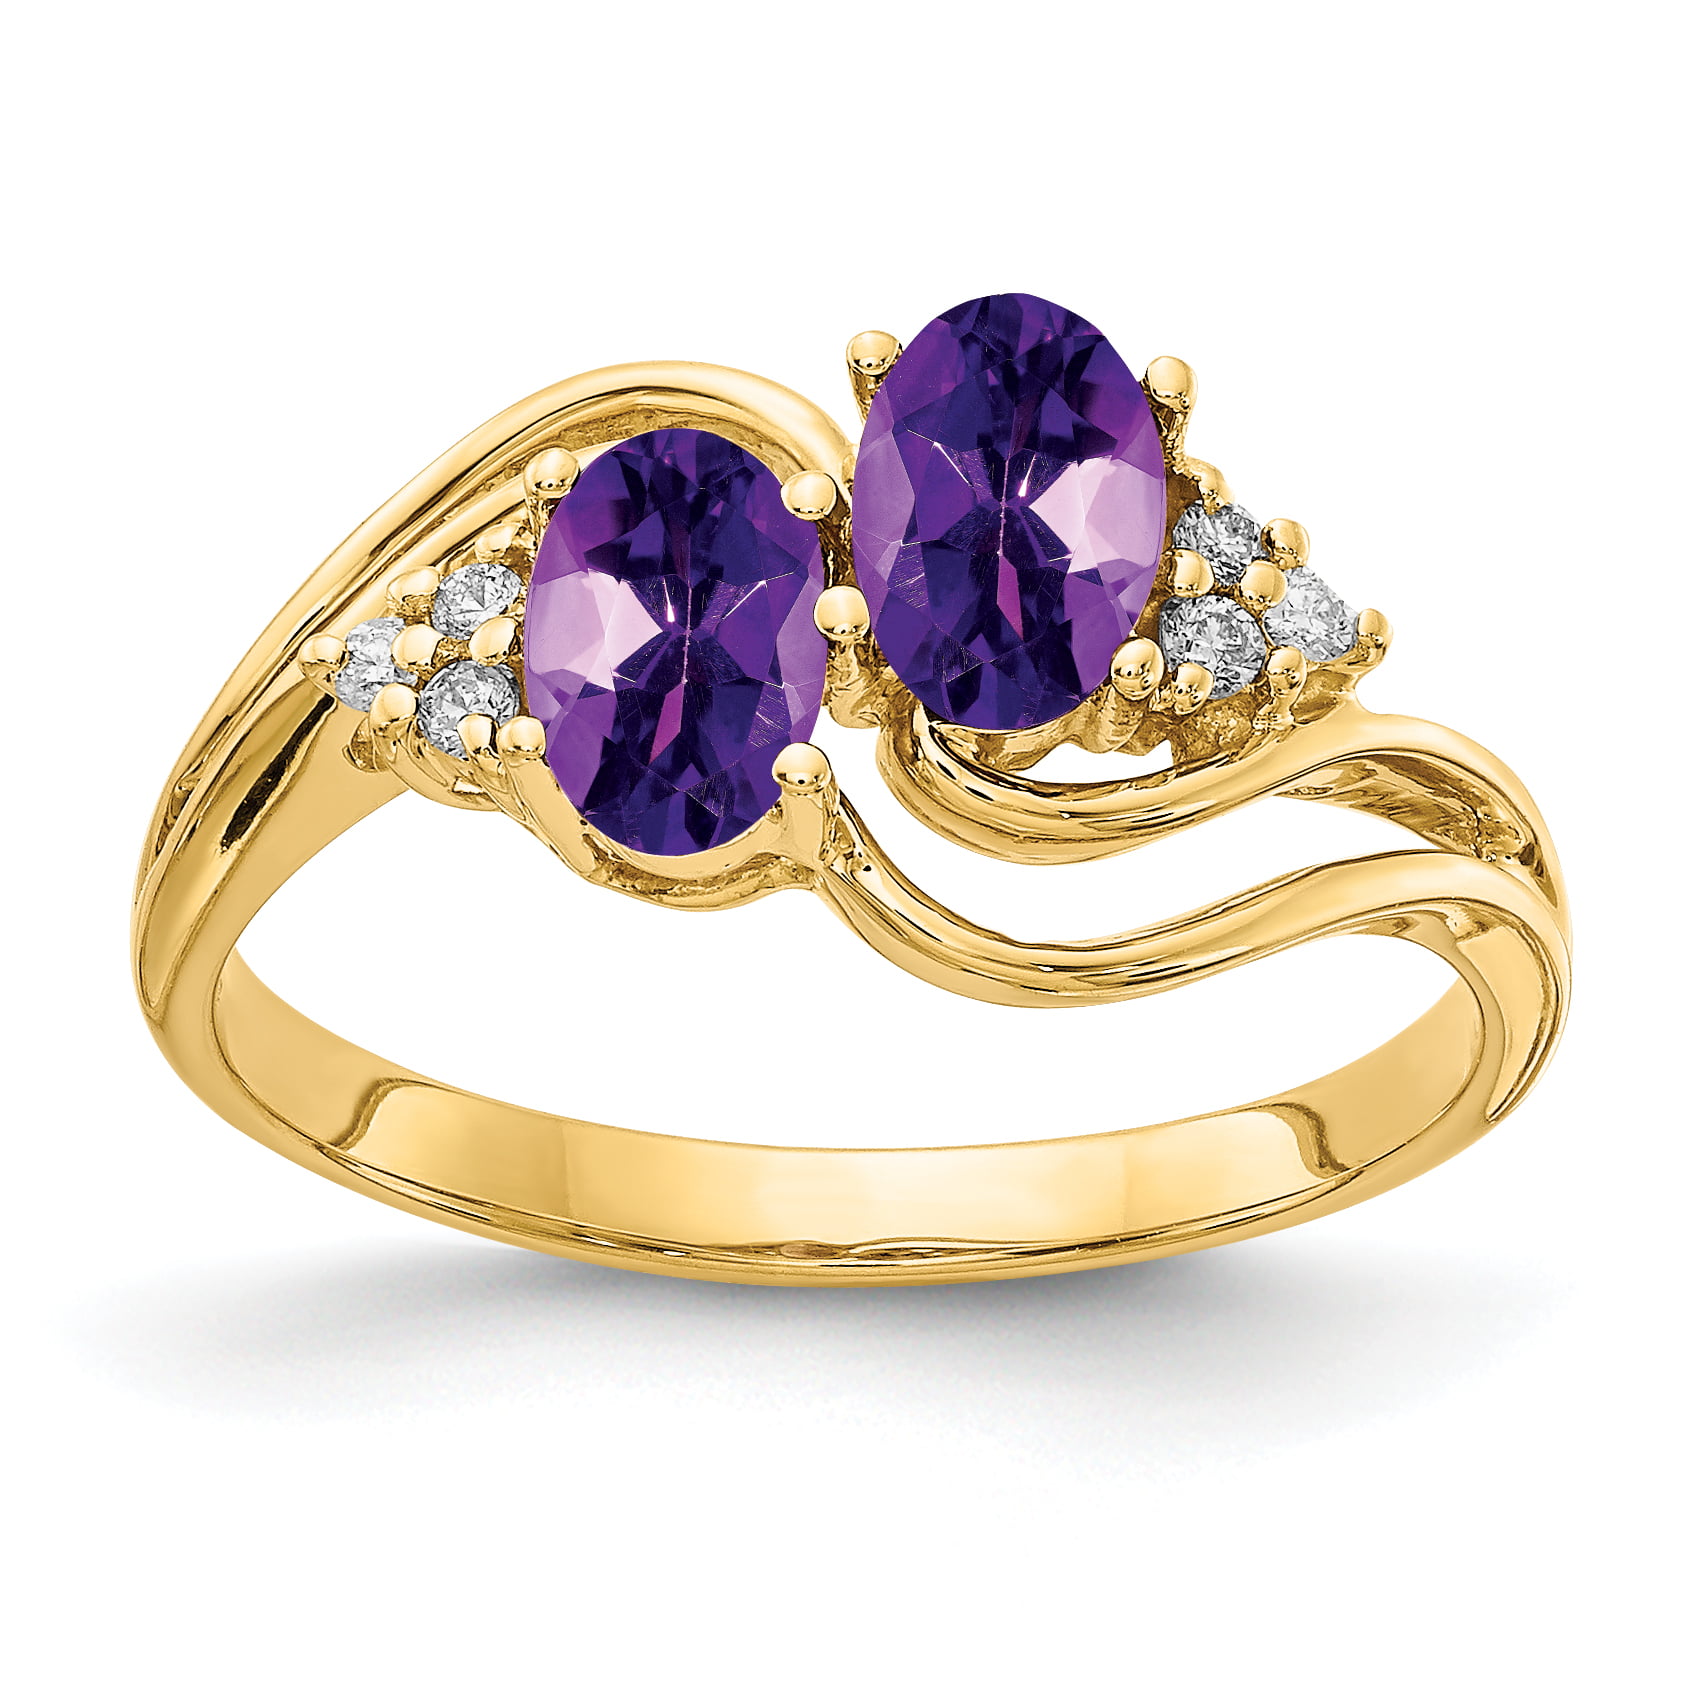 6.00 Cttw Round Cut Simulated Amethyst Solitaire Stud Earrings In 14K Solid Gold